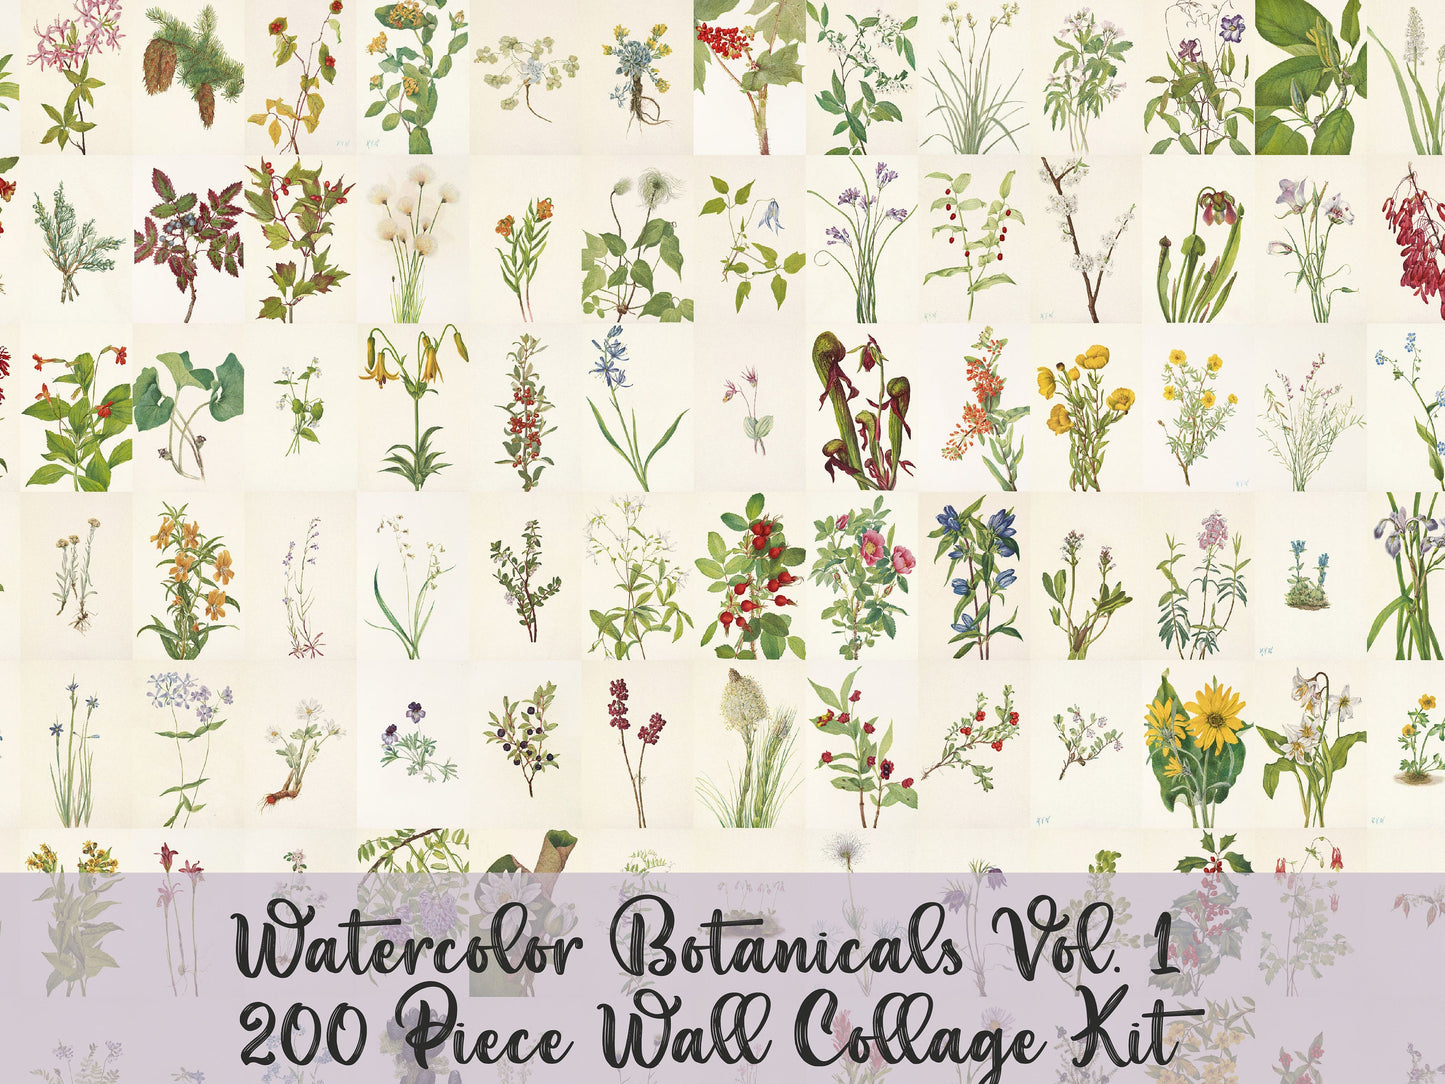 Watercolor Wildflowers 4"x6" Collage Kit Set 1 [200 Images]